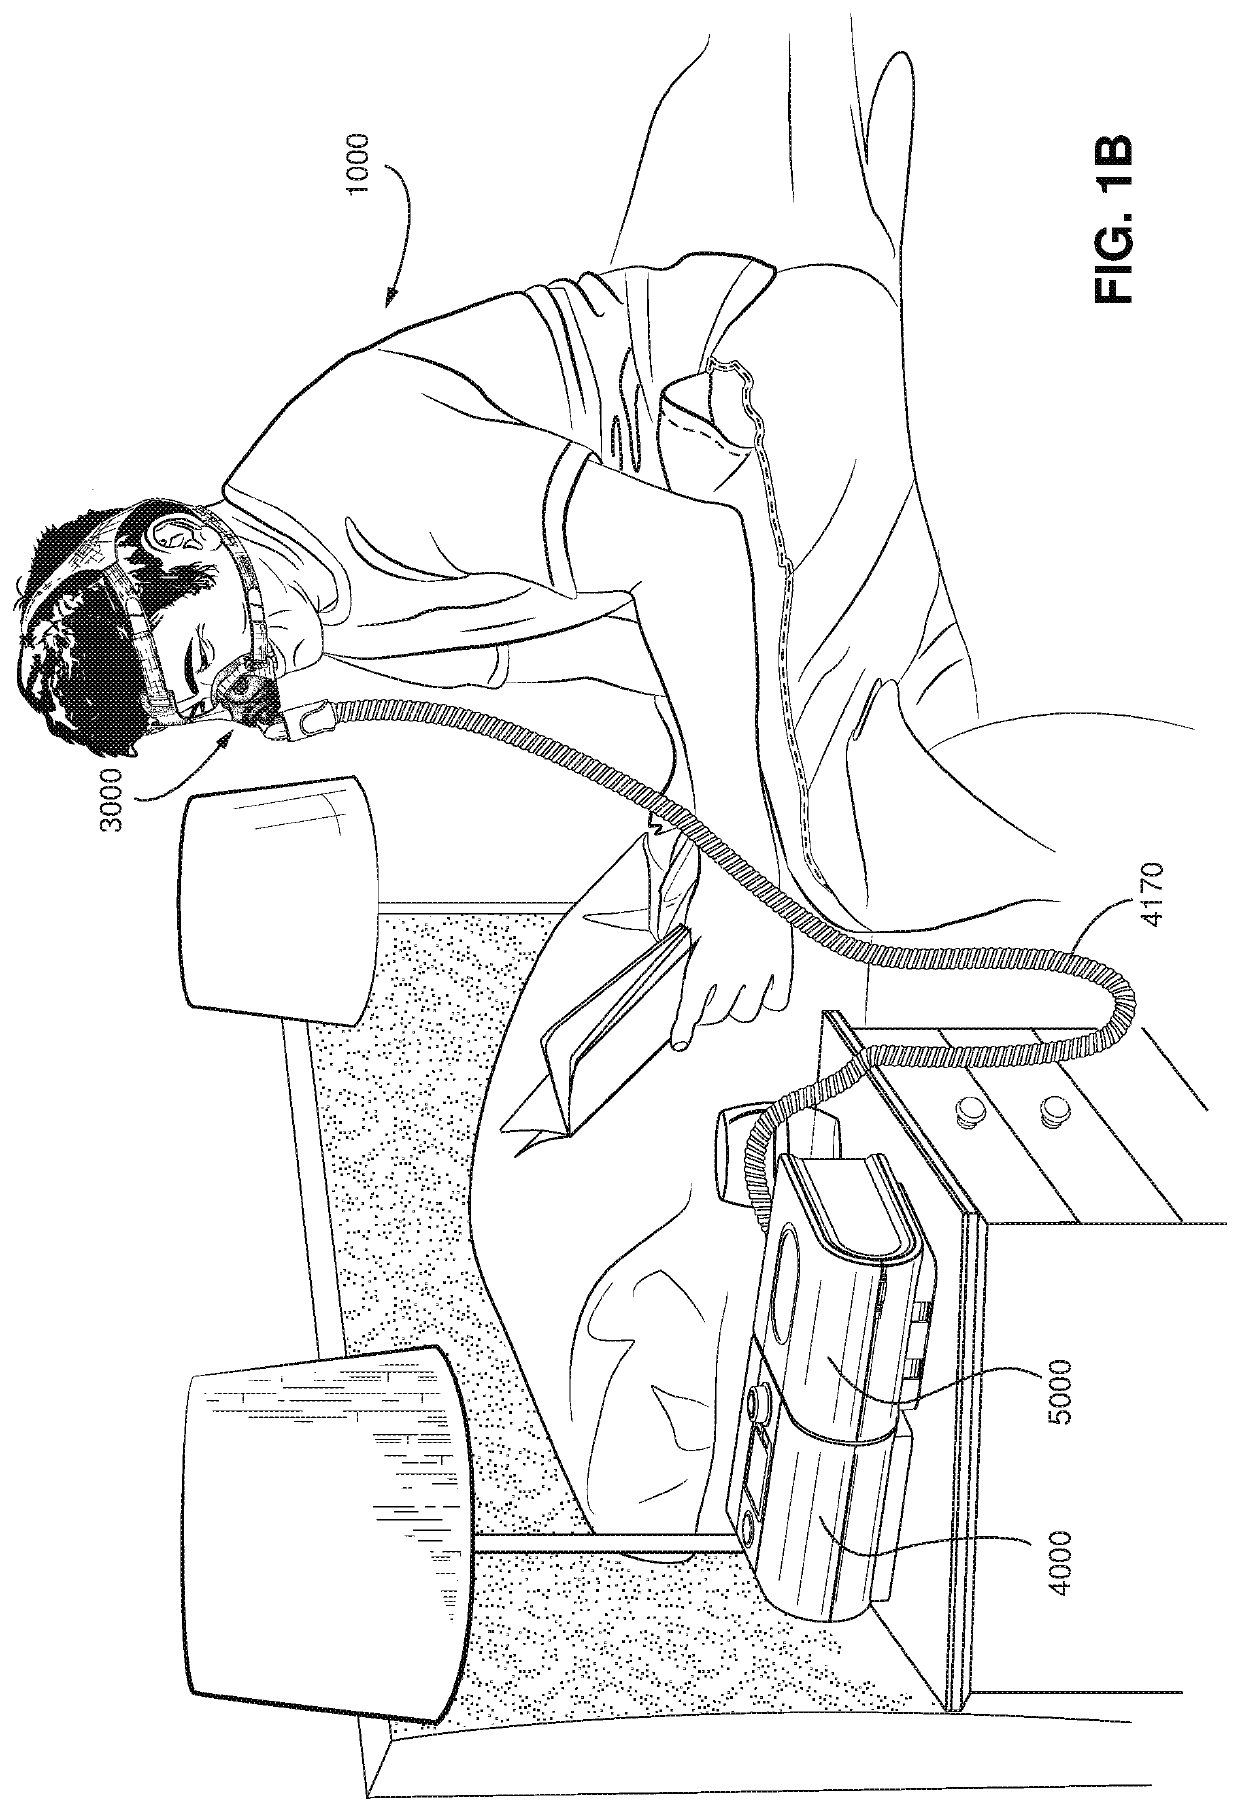 Vent adaptor for patient interface system